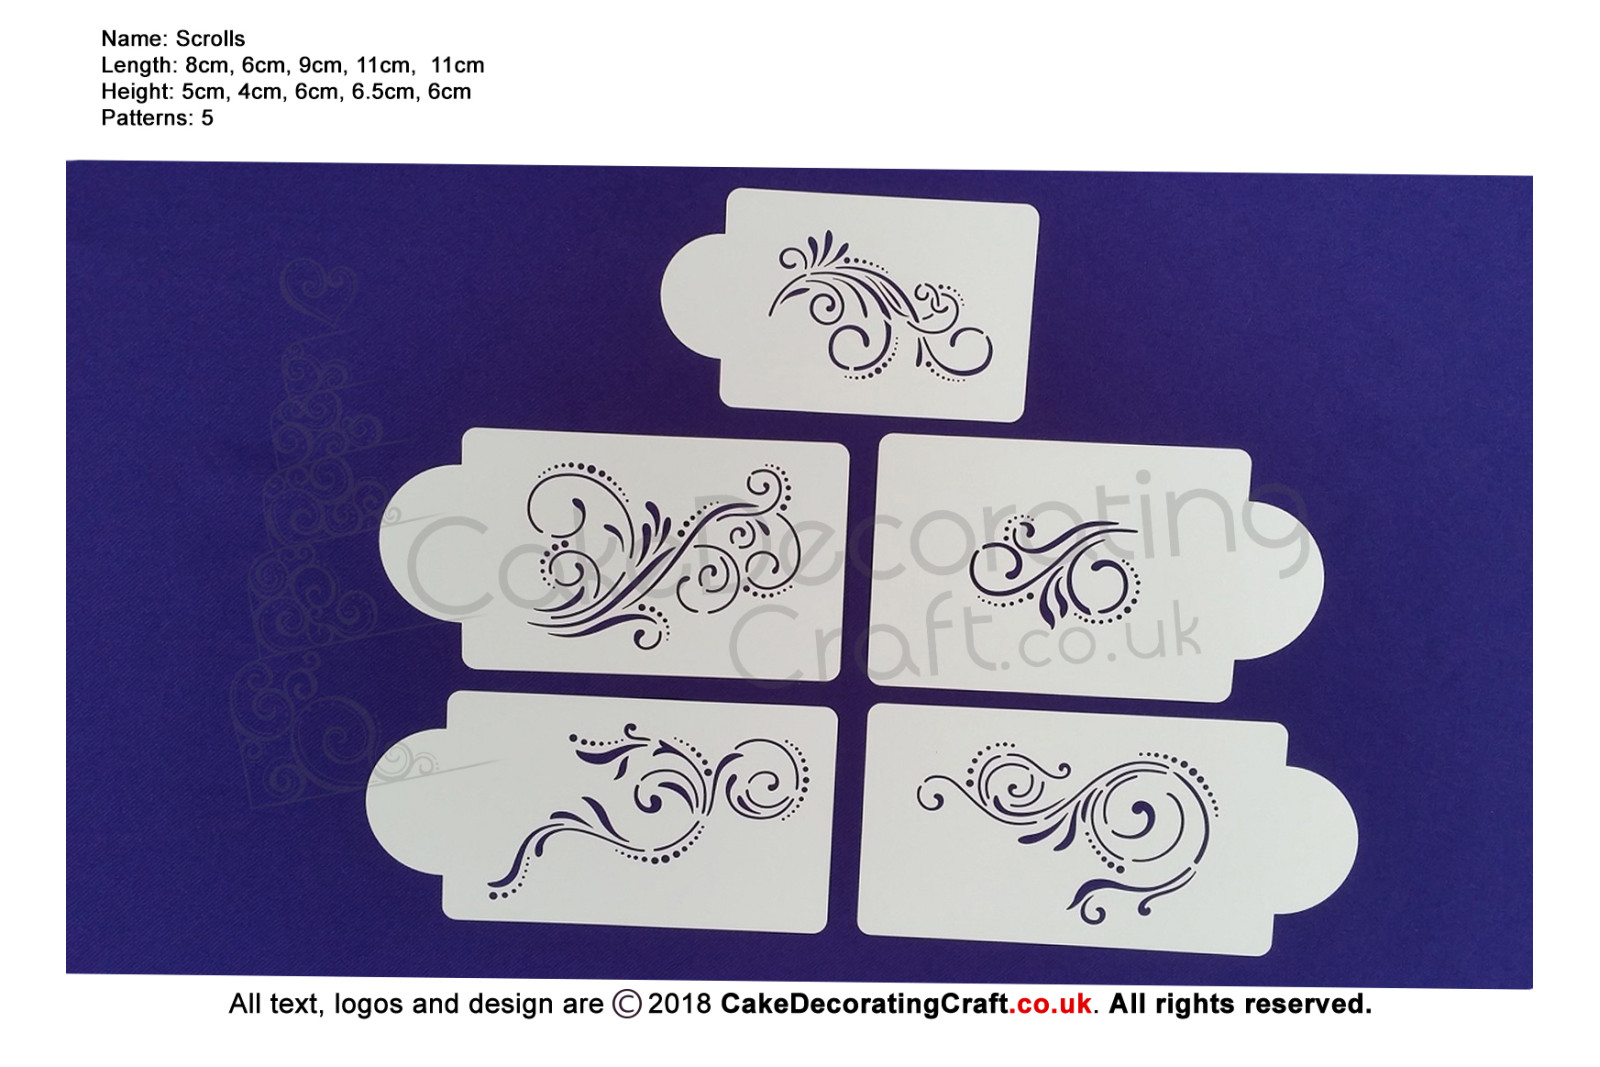 Scrolls Stencil | Air Brush Stenciling | Cake and Cupcake Decorating Craft Tool